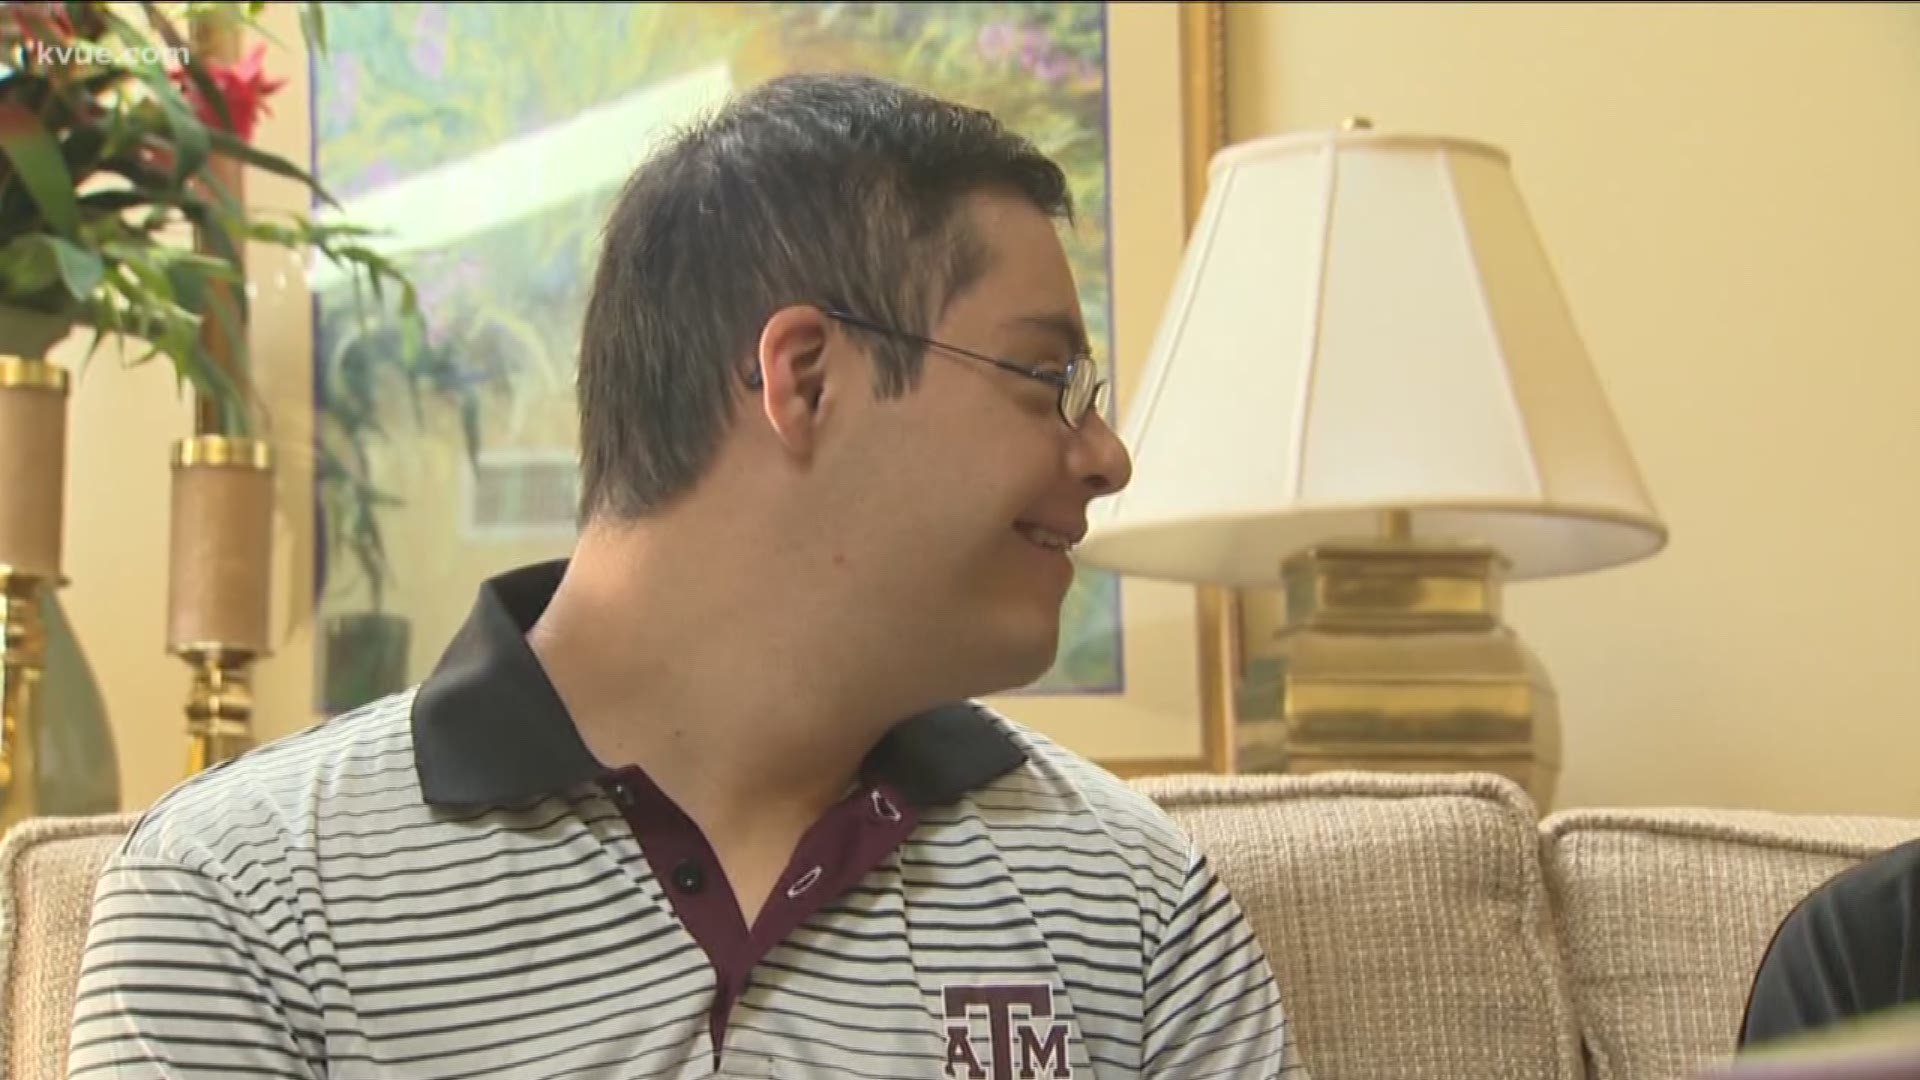 A brand new college program at Texas A&M University will help more students succeed across the state.